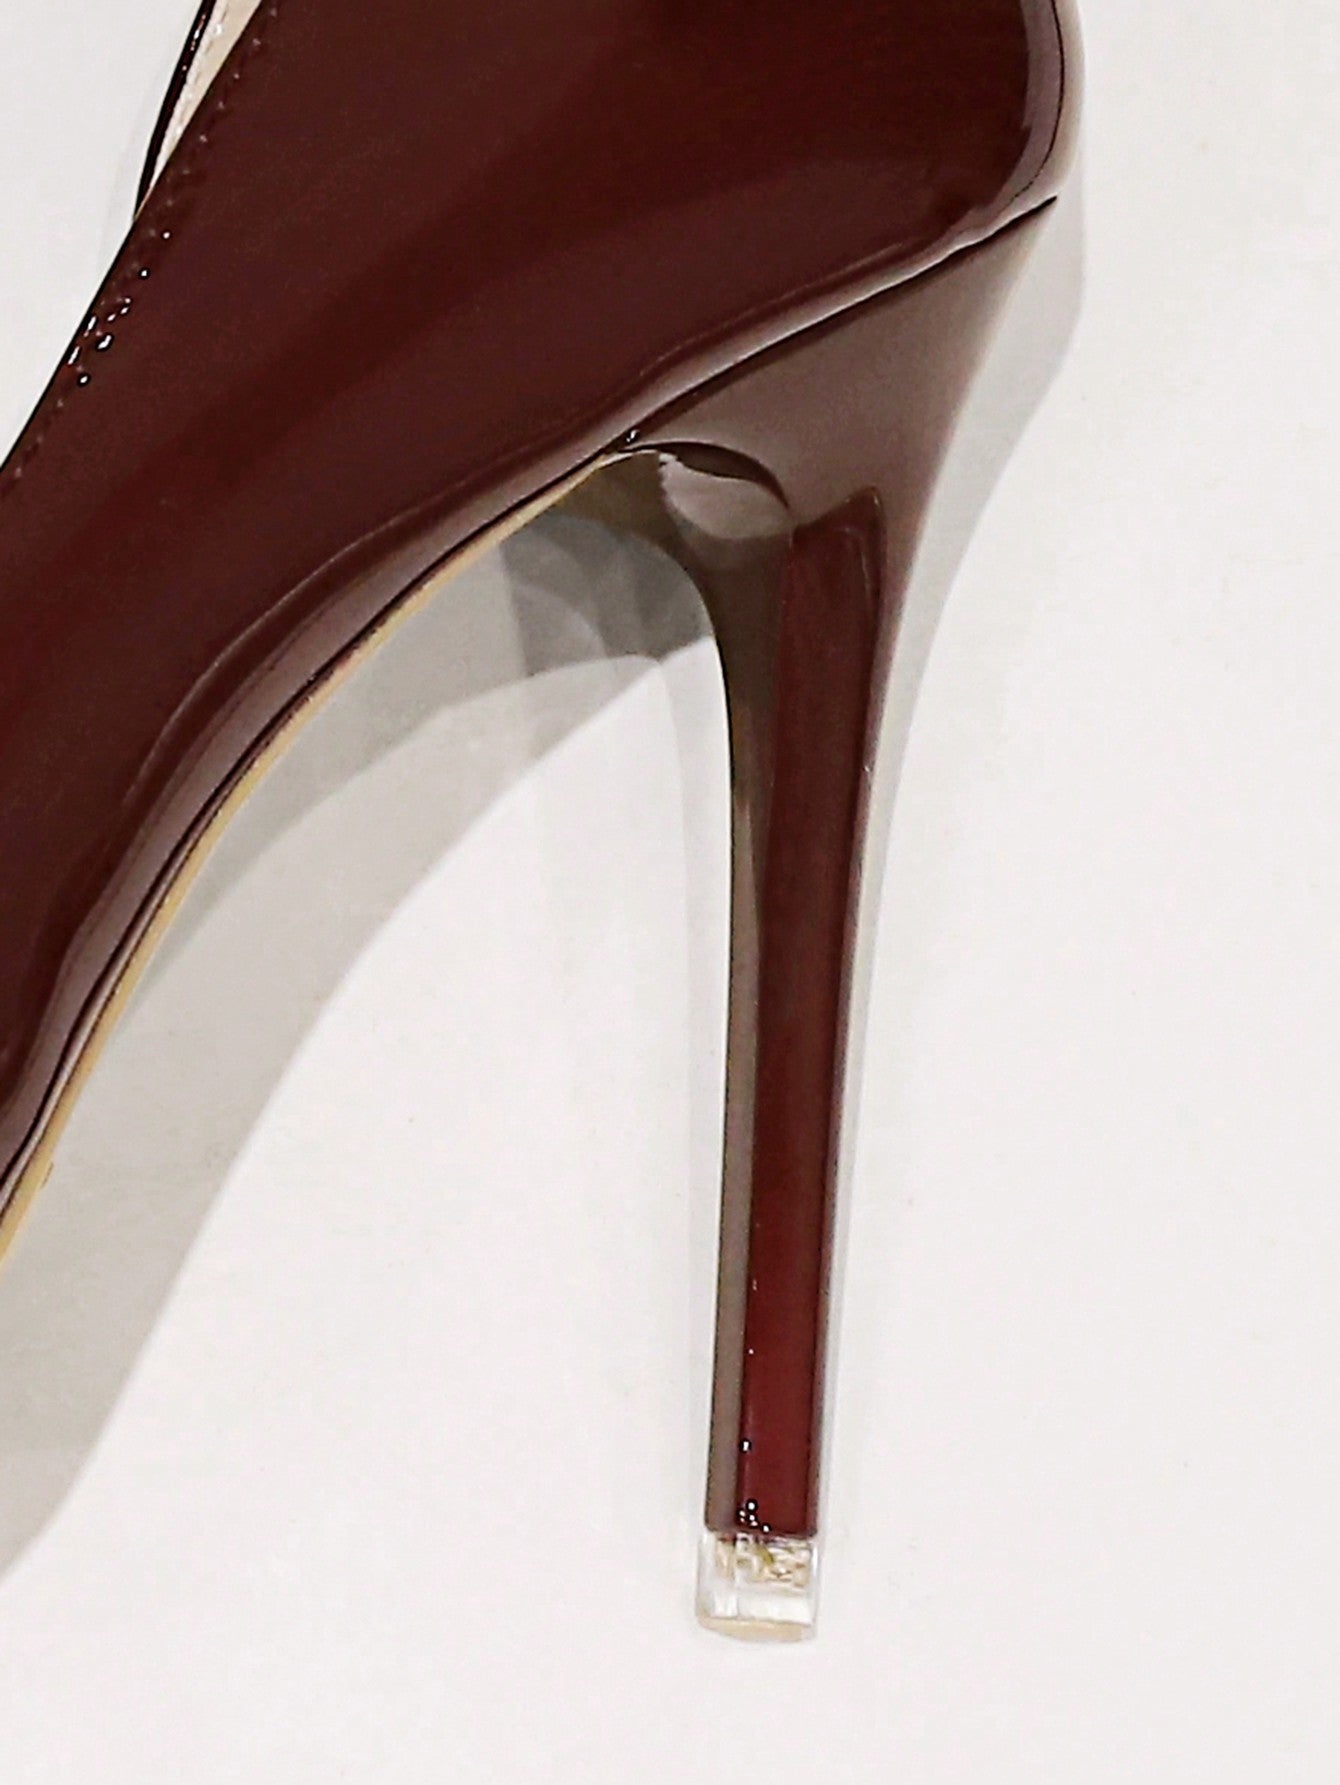 Fashionable Patent Leather Stiletto High Heel Pumps